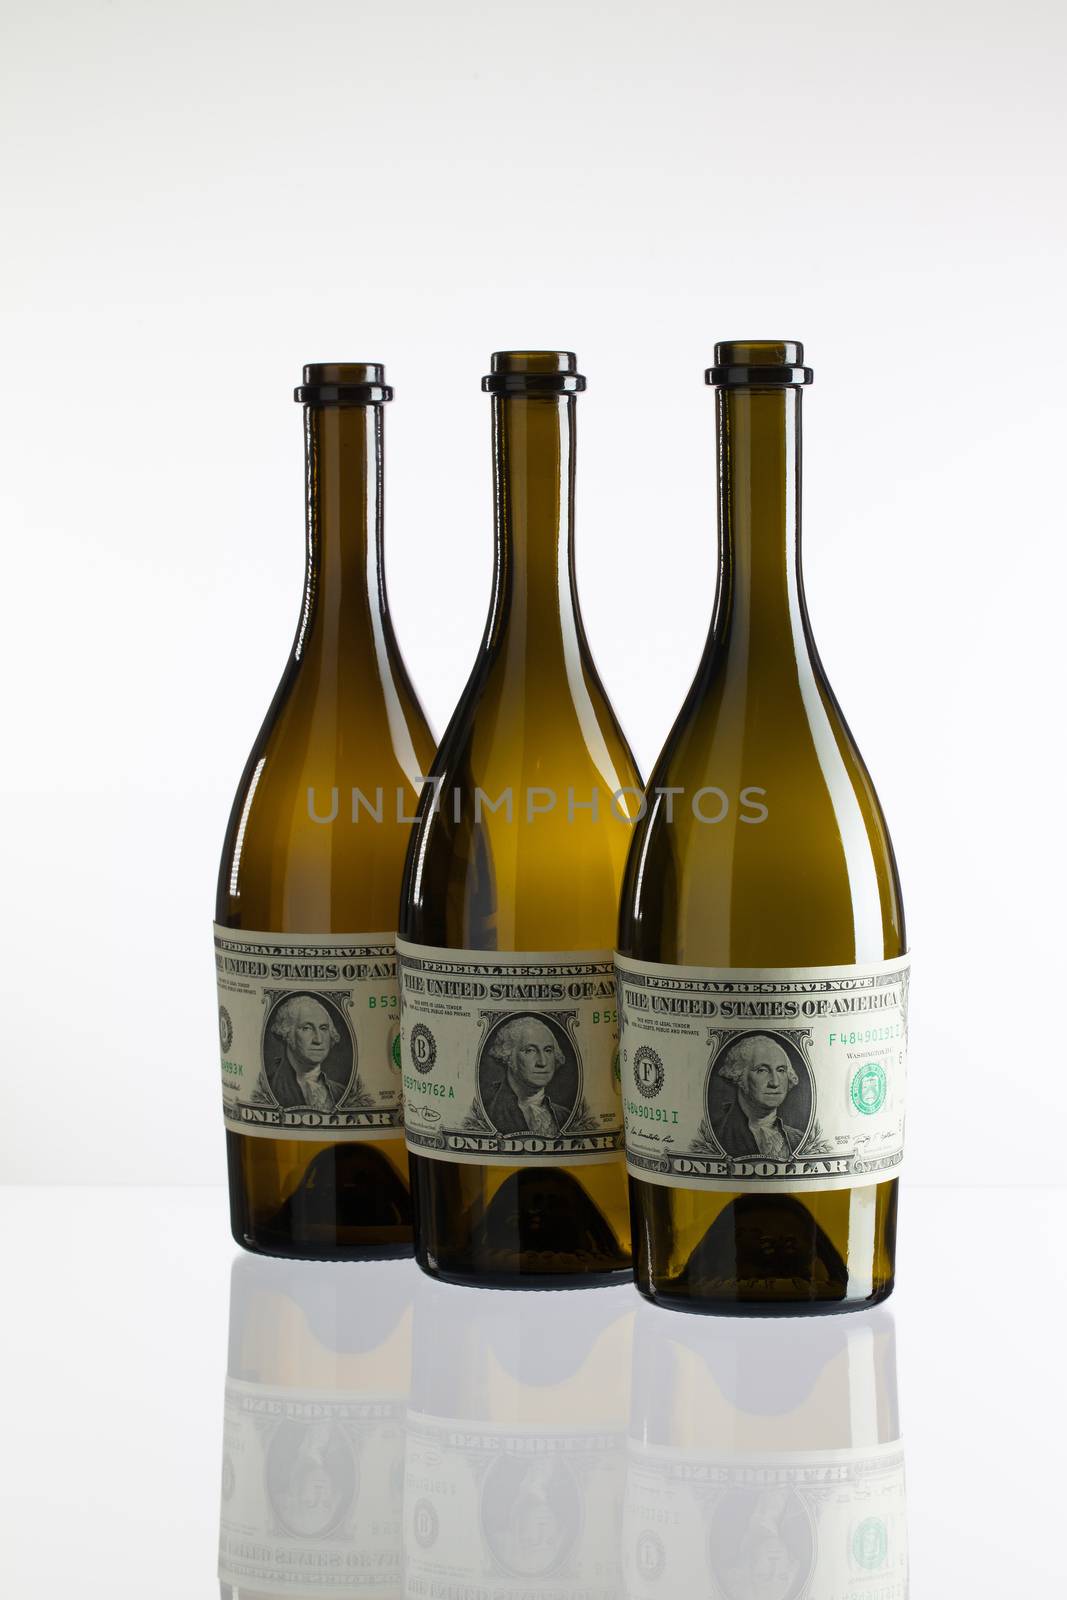 Empty bottles of wine from the label of dollar bill on a glass table